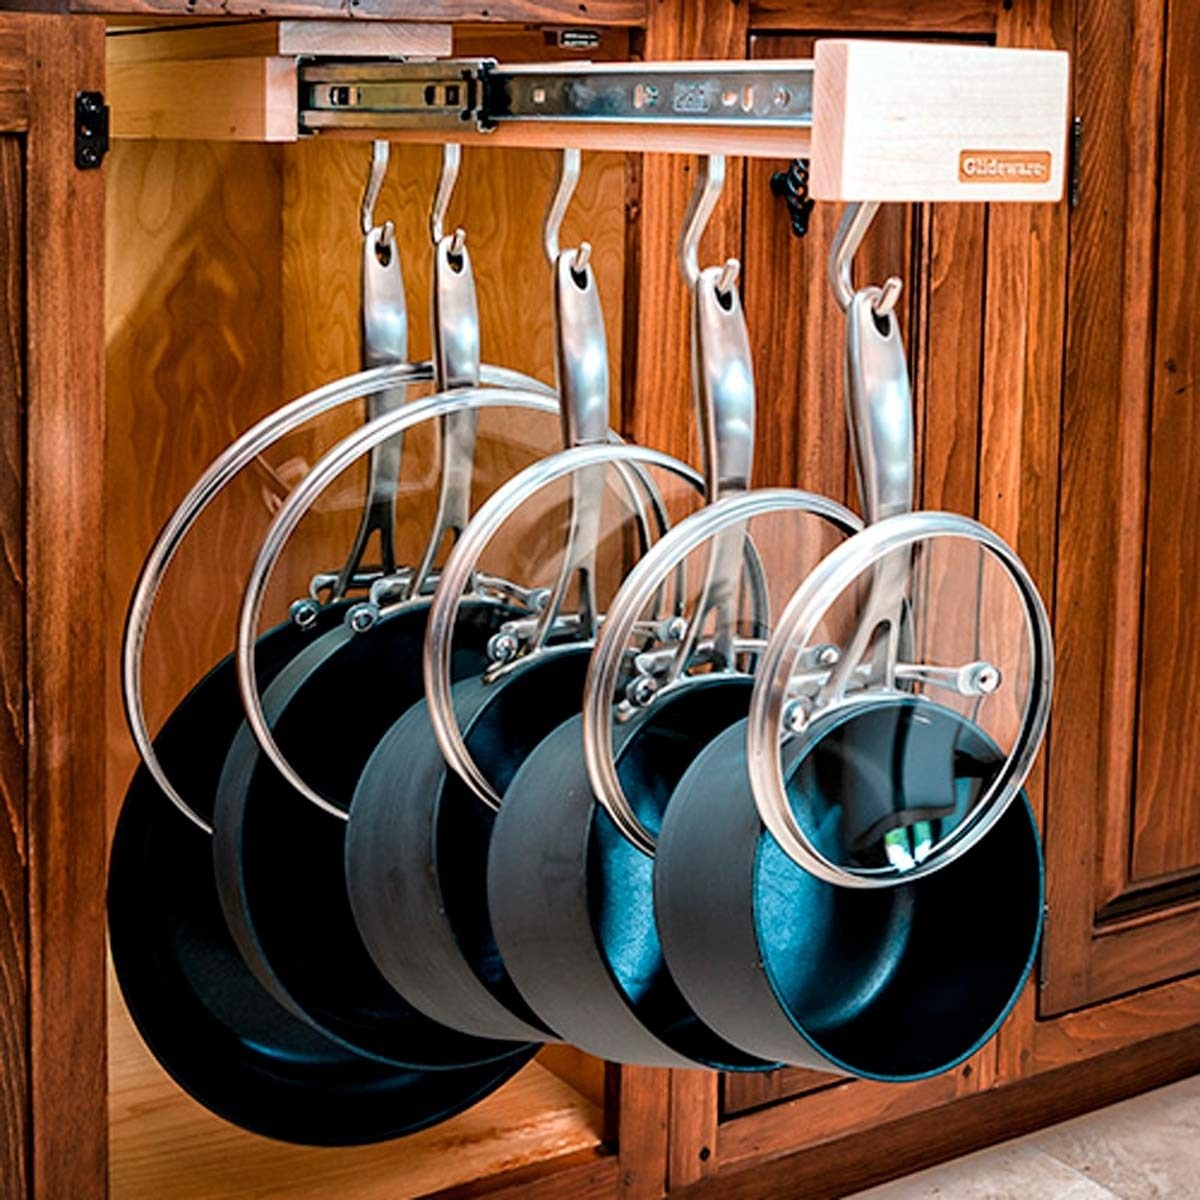 15 kitchen cabinet organizers that will change your life